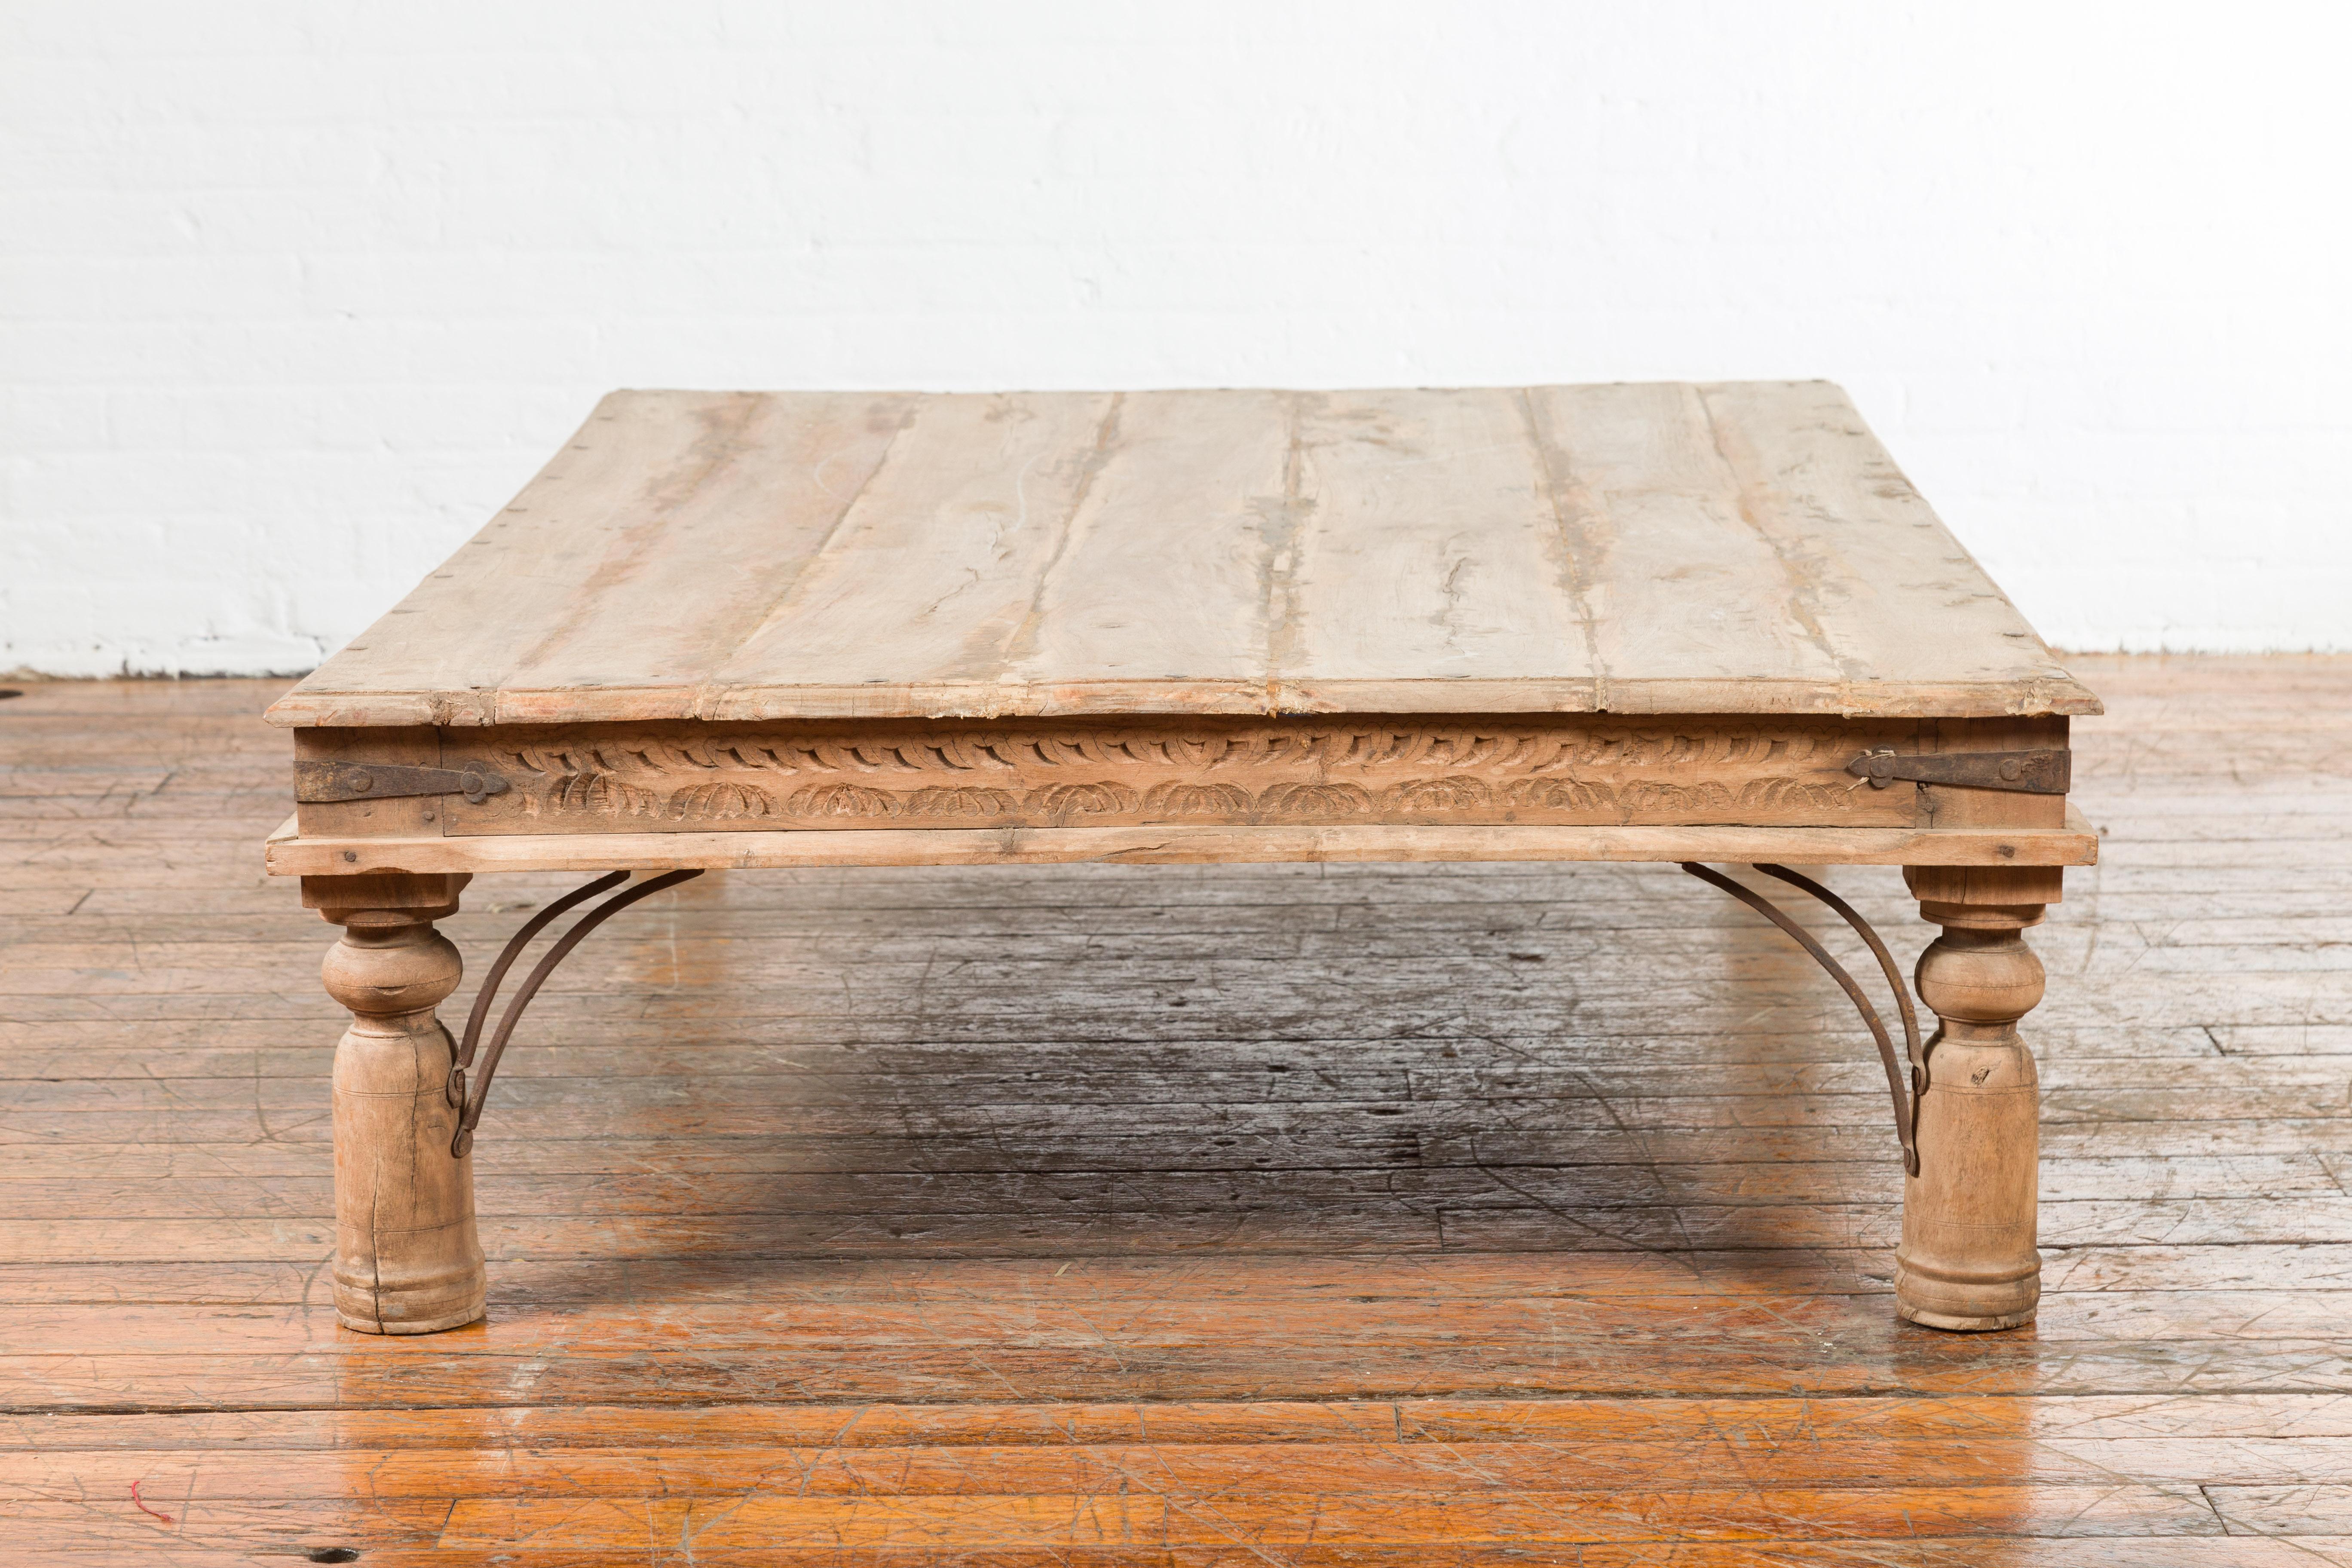 Oversized Early 20th Century Indian Rustic Coffee Table with Iron Accents 12